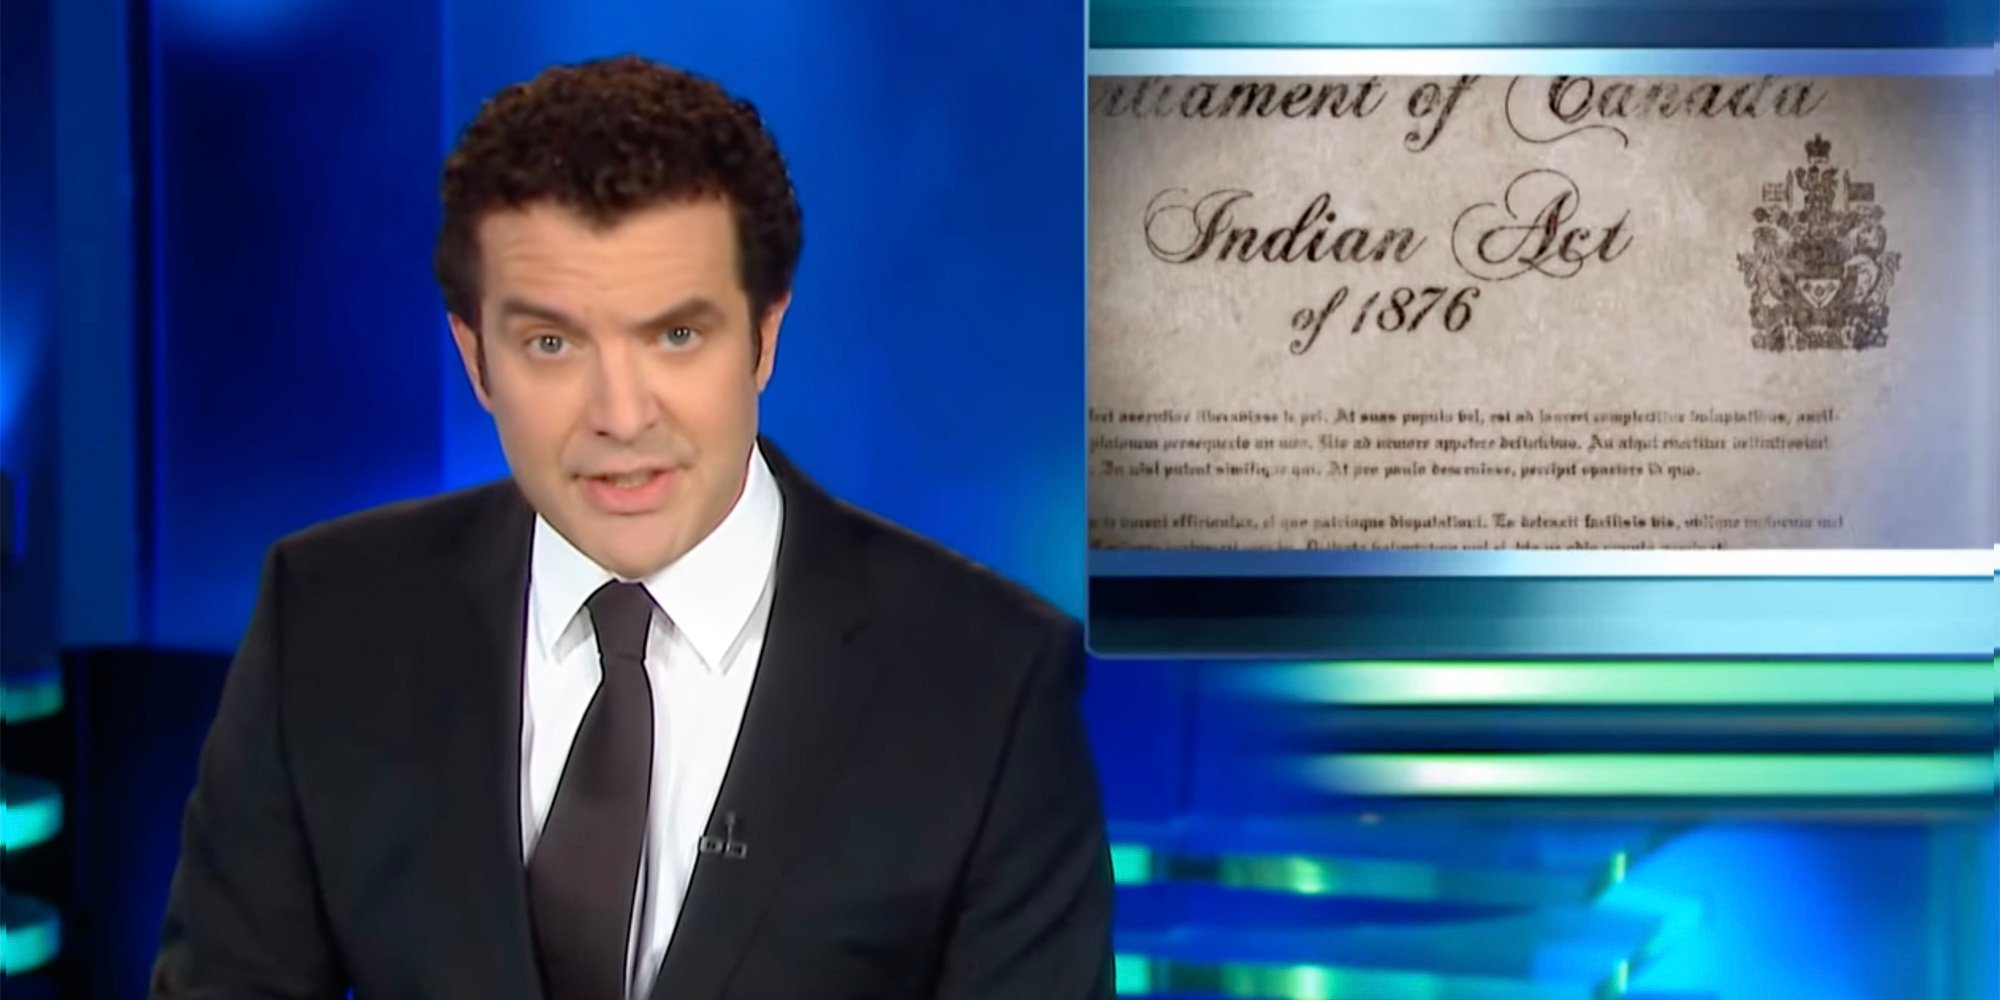 YouTube screenshot of comedian Rick Mercer talking about the Indian Act